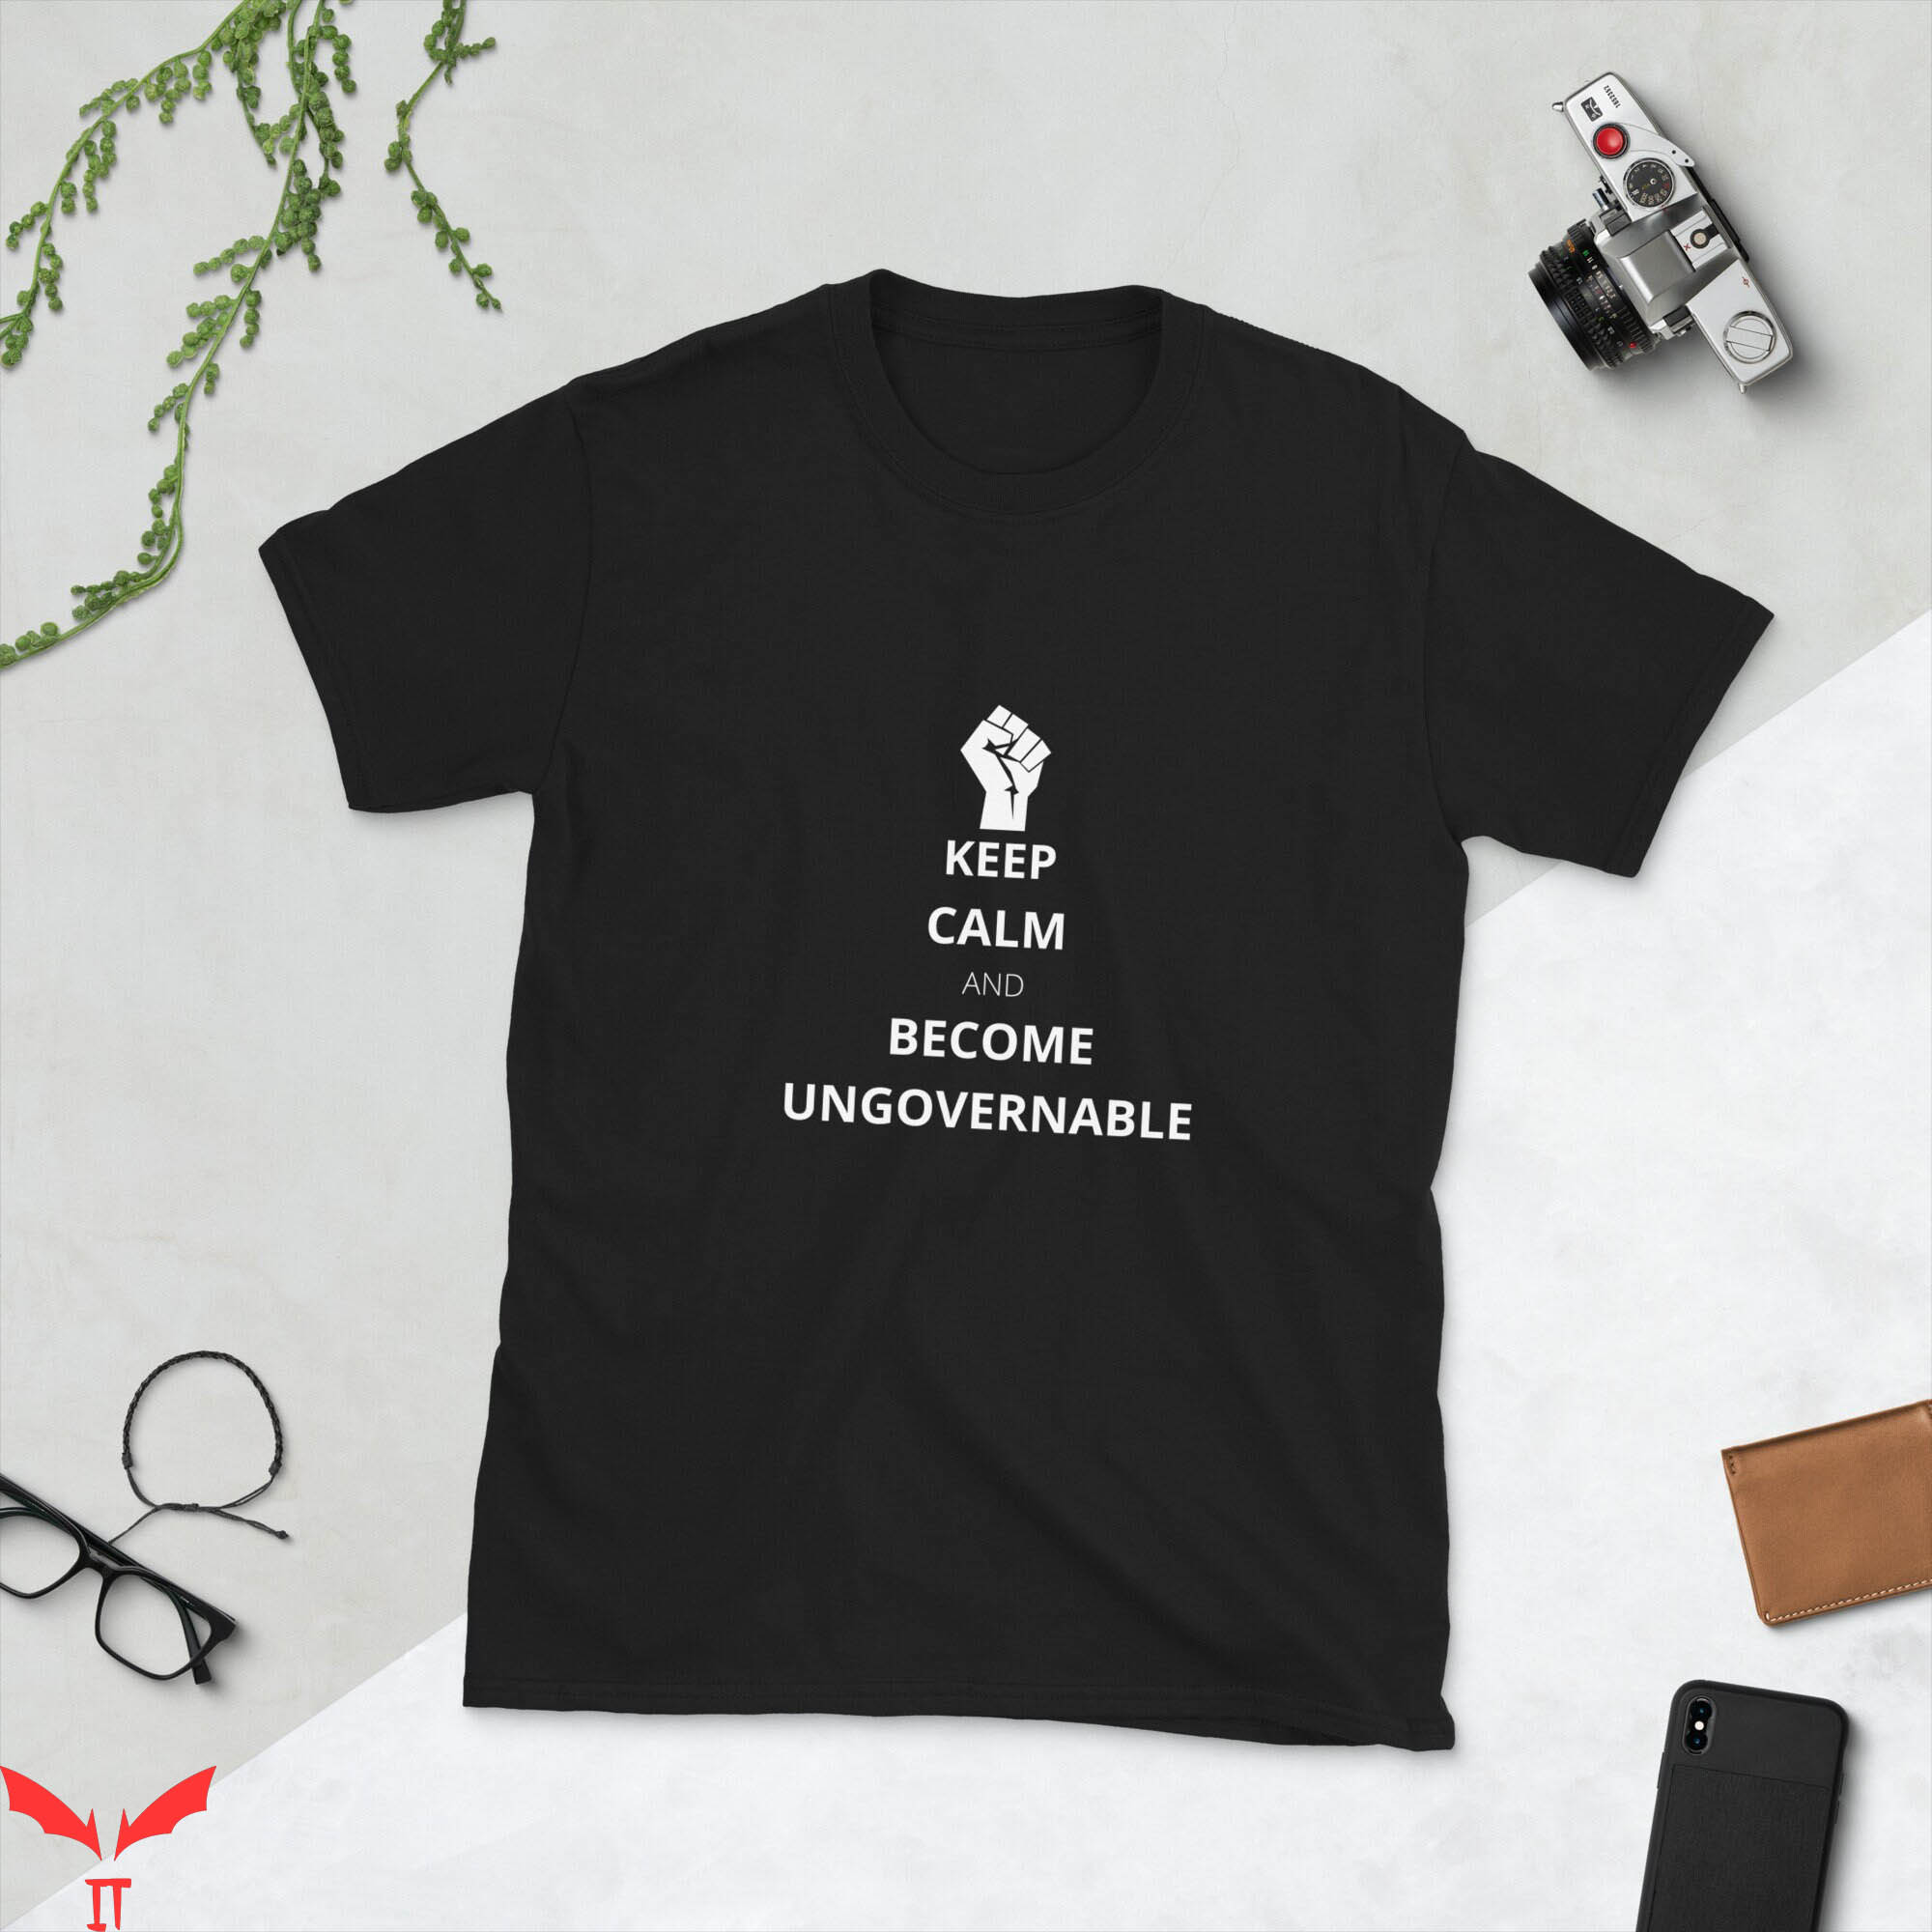 Become Ungovernable T-Shirt Keep Calm And Become Libertarian